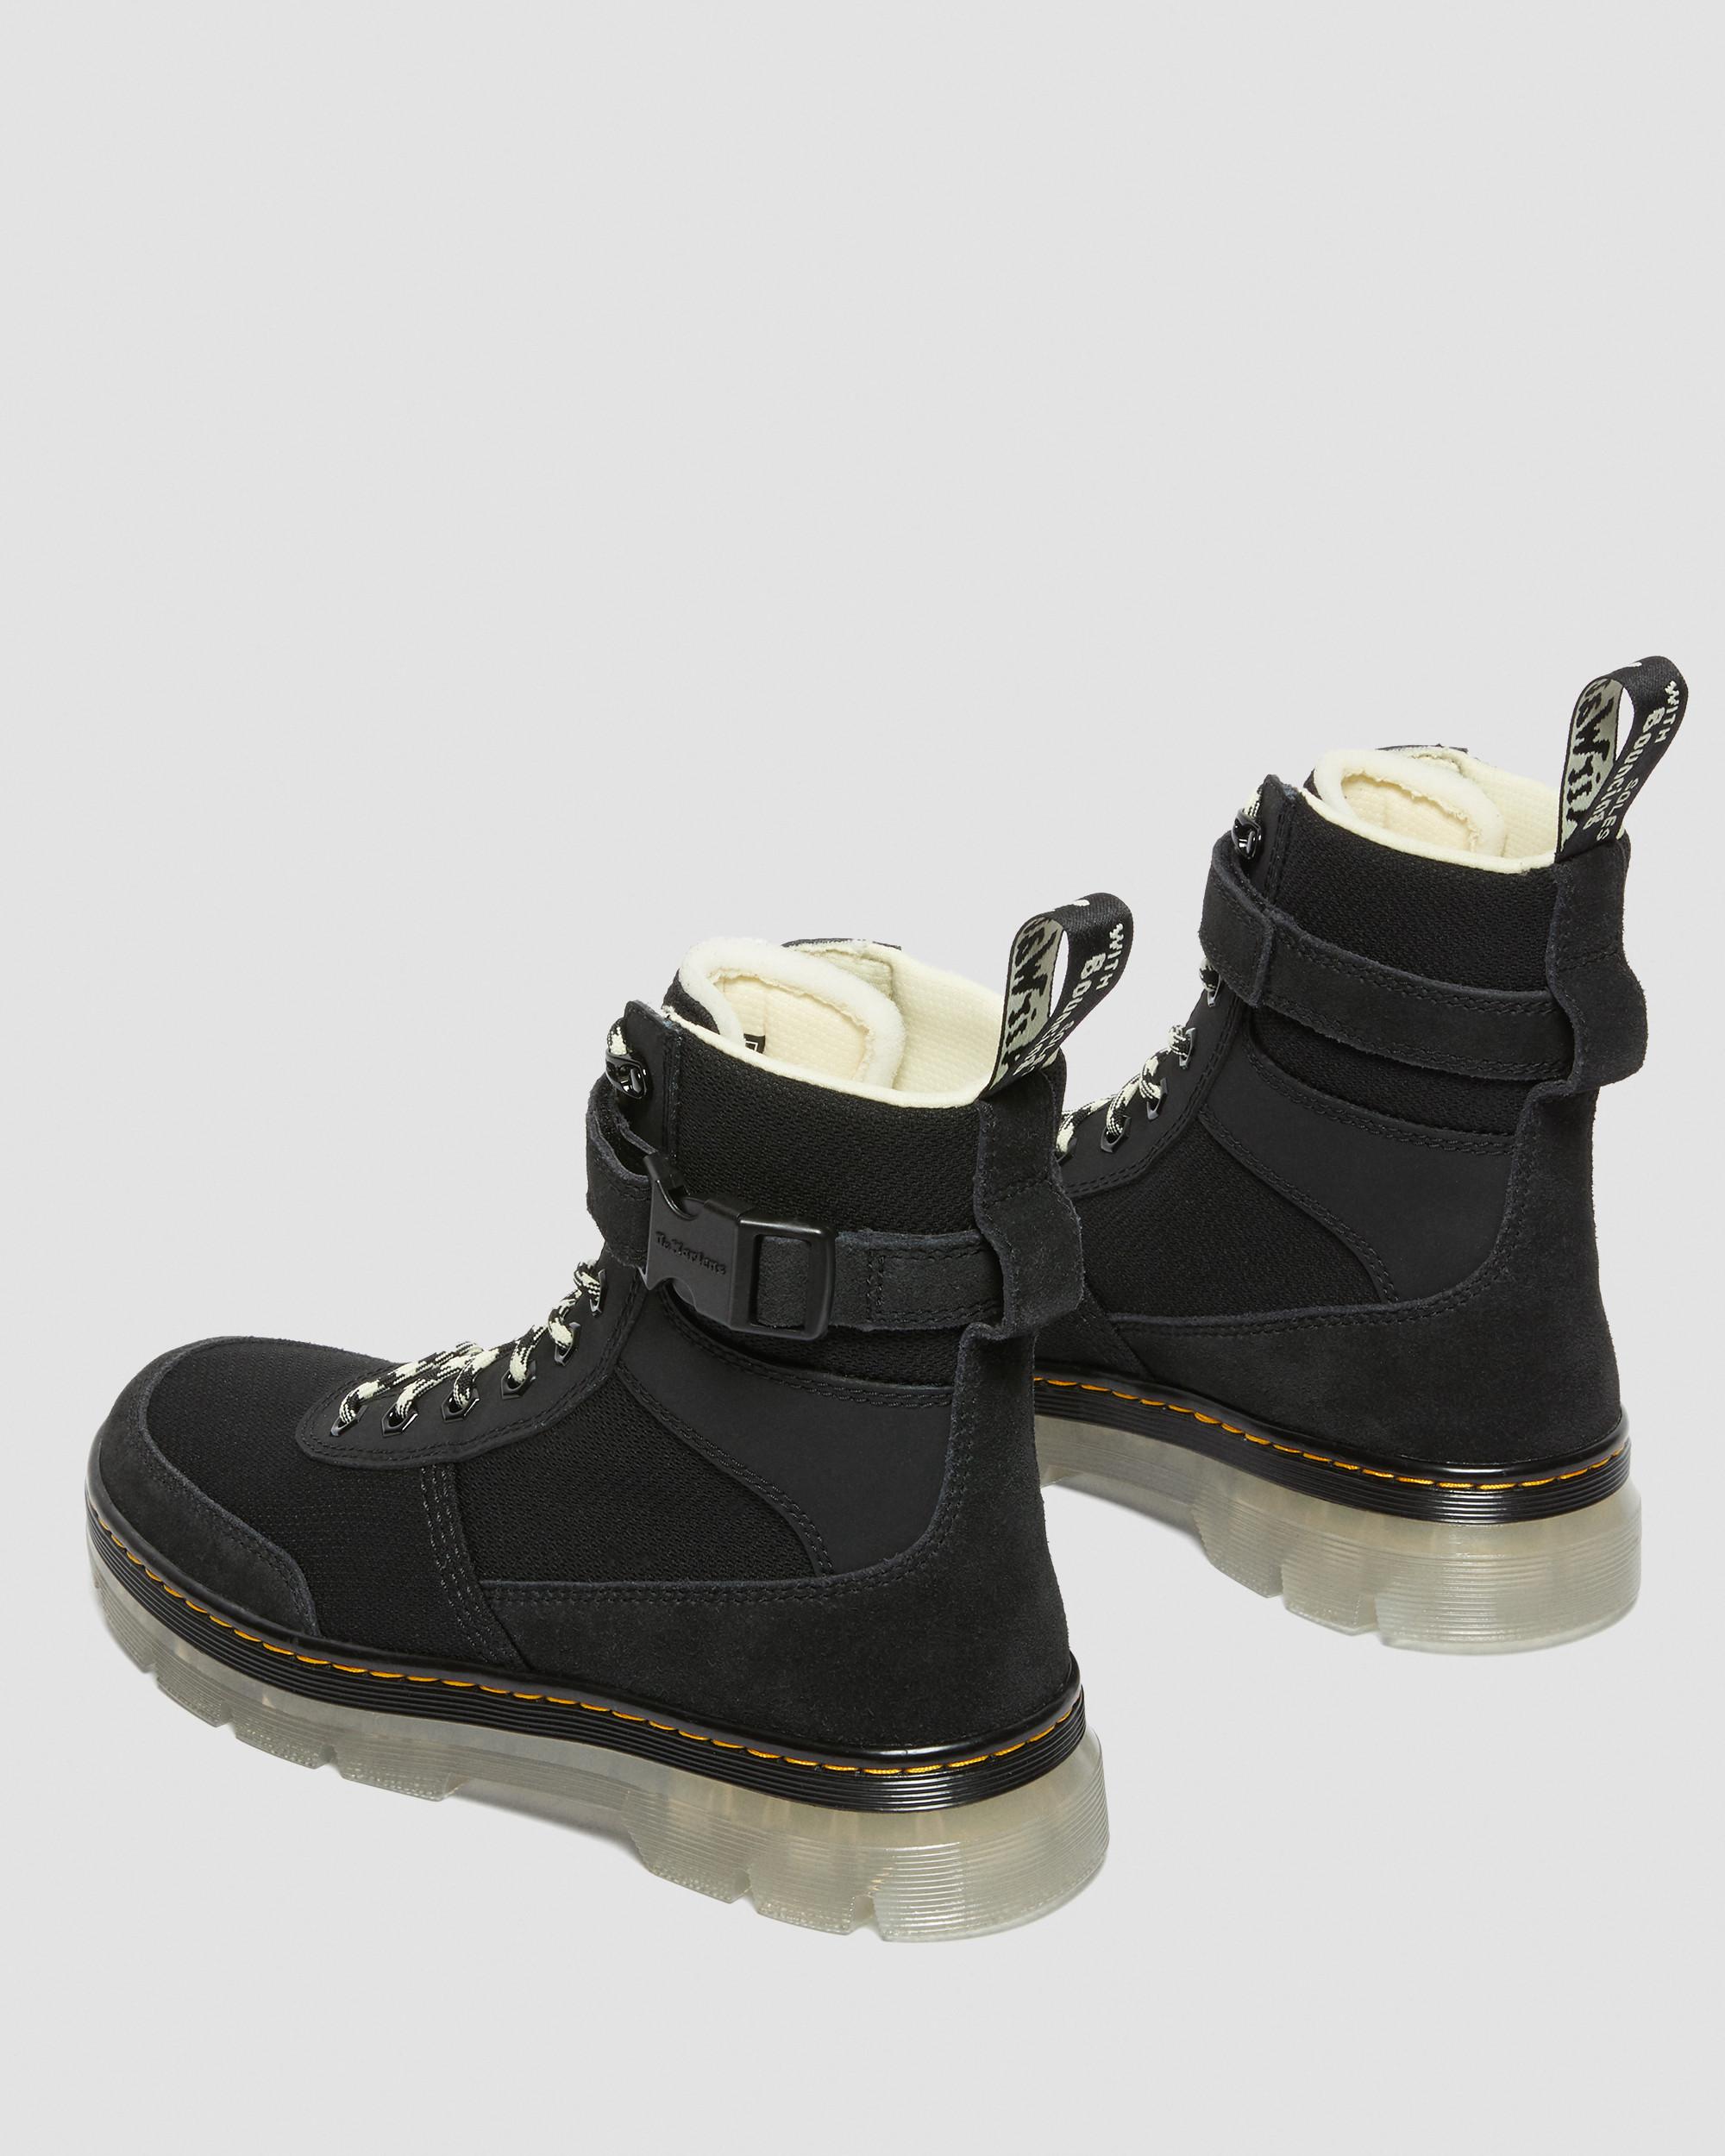 Combs Tech Iced Casual Boots in Black | Dr. Martens